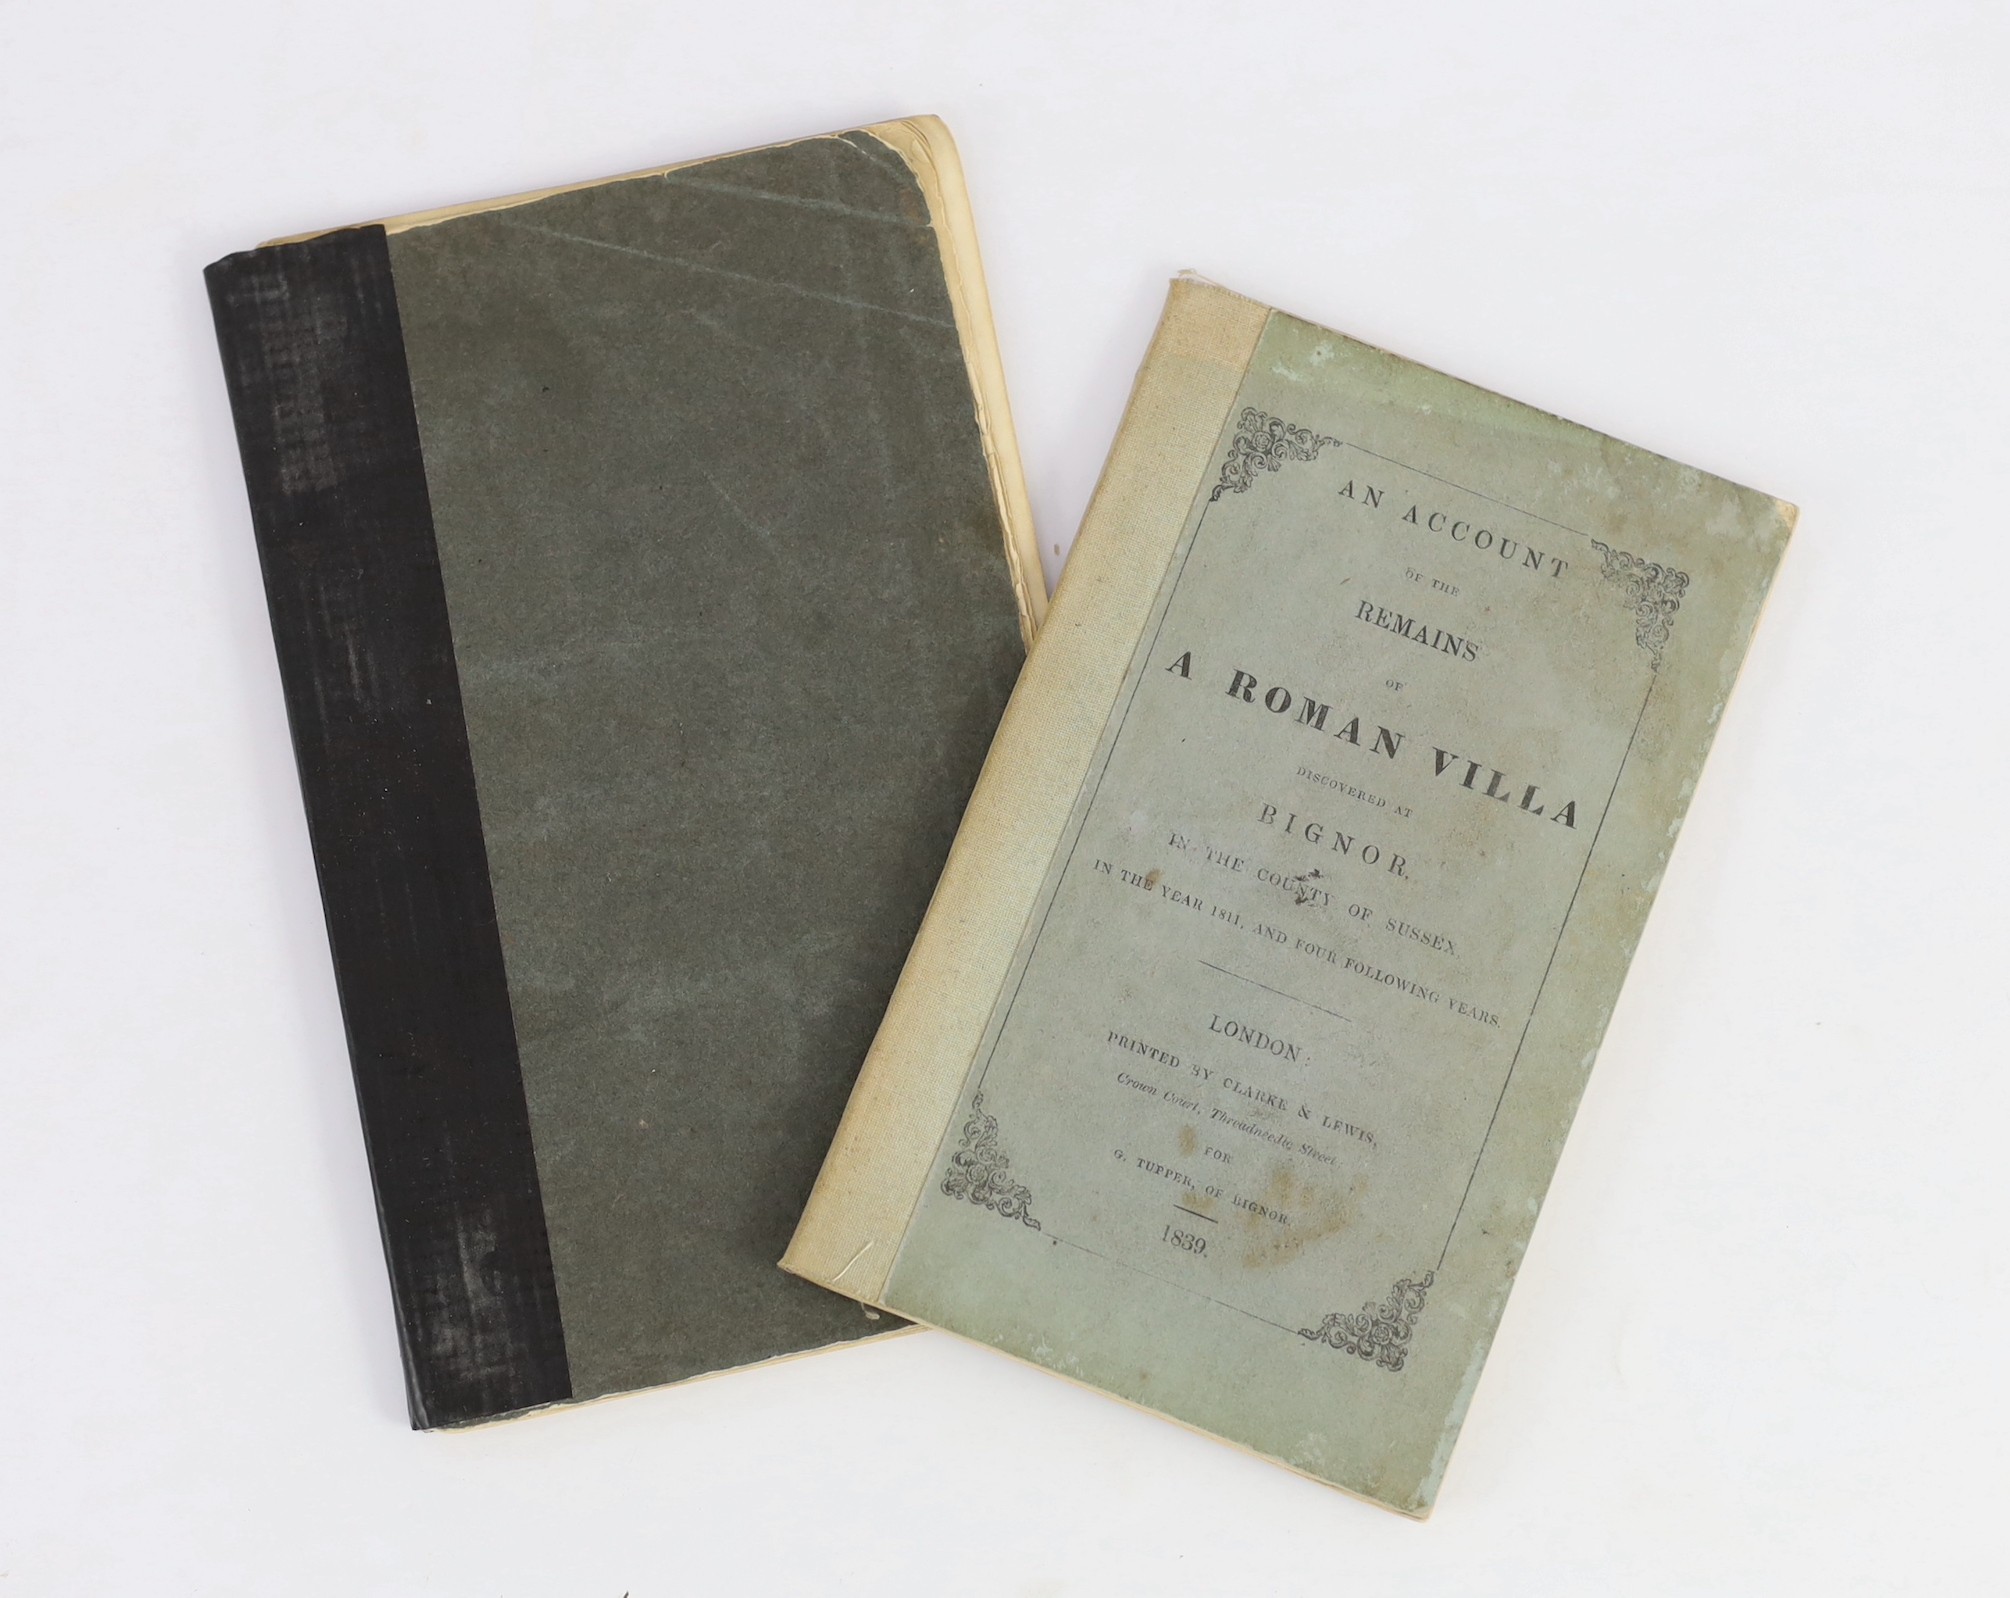 ARUNDEL: (Lysons, Samuel) - An Account of the Remains of a Roman Villa discovered at Bignor, in the County of Sussex ... folded and coloured plan, 5 plates; cloth-backed original printed wrappers.                        